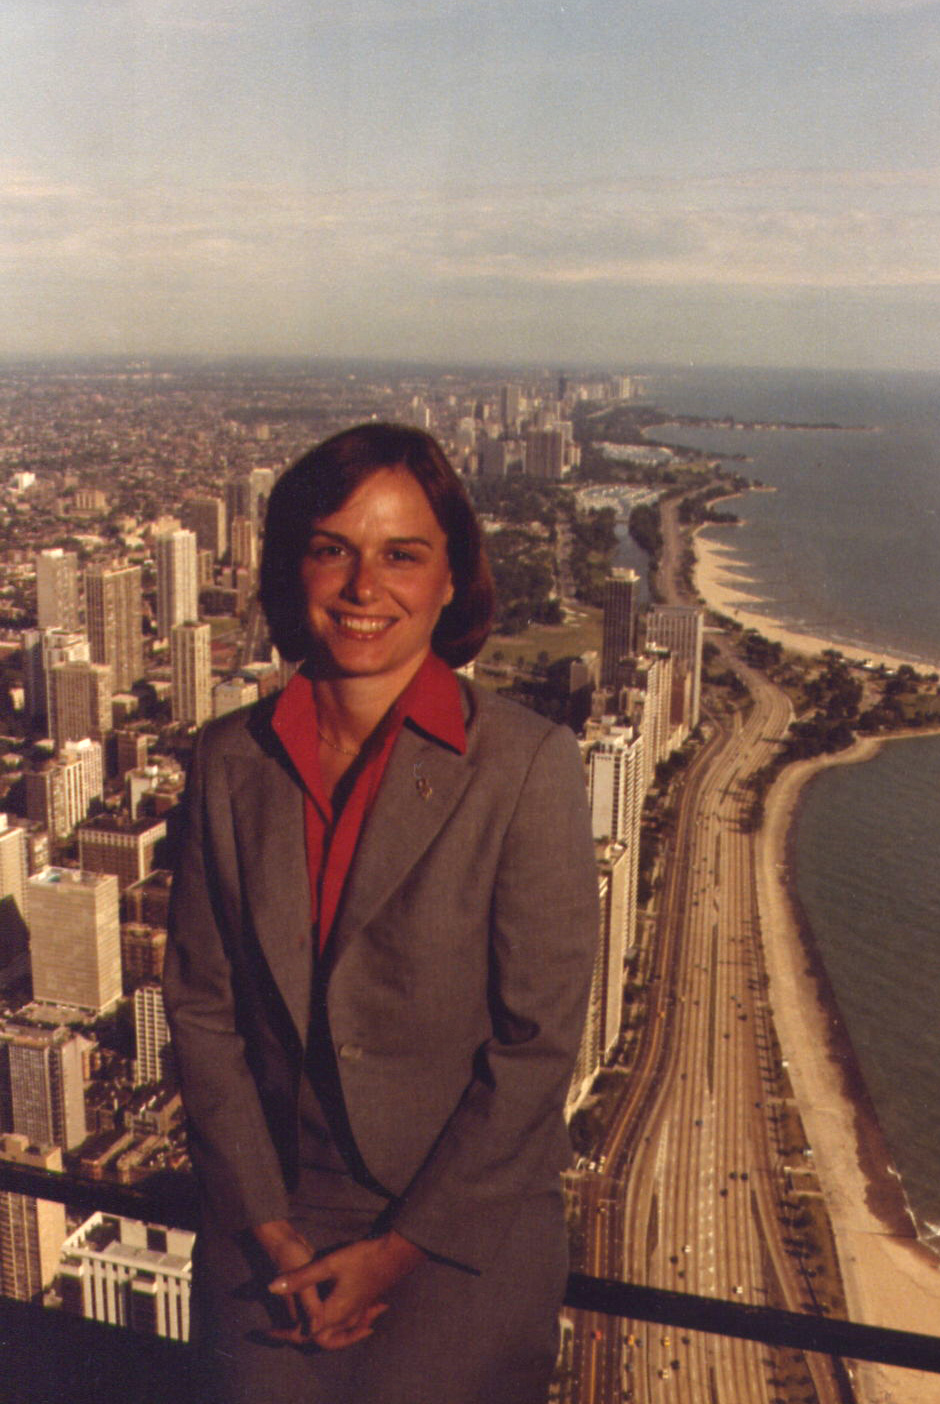  Candidate for U.S. House of Representatives IL-9 in Chicago (1982) 